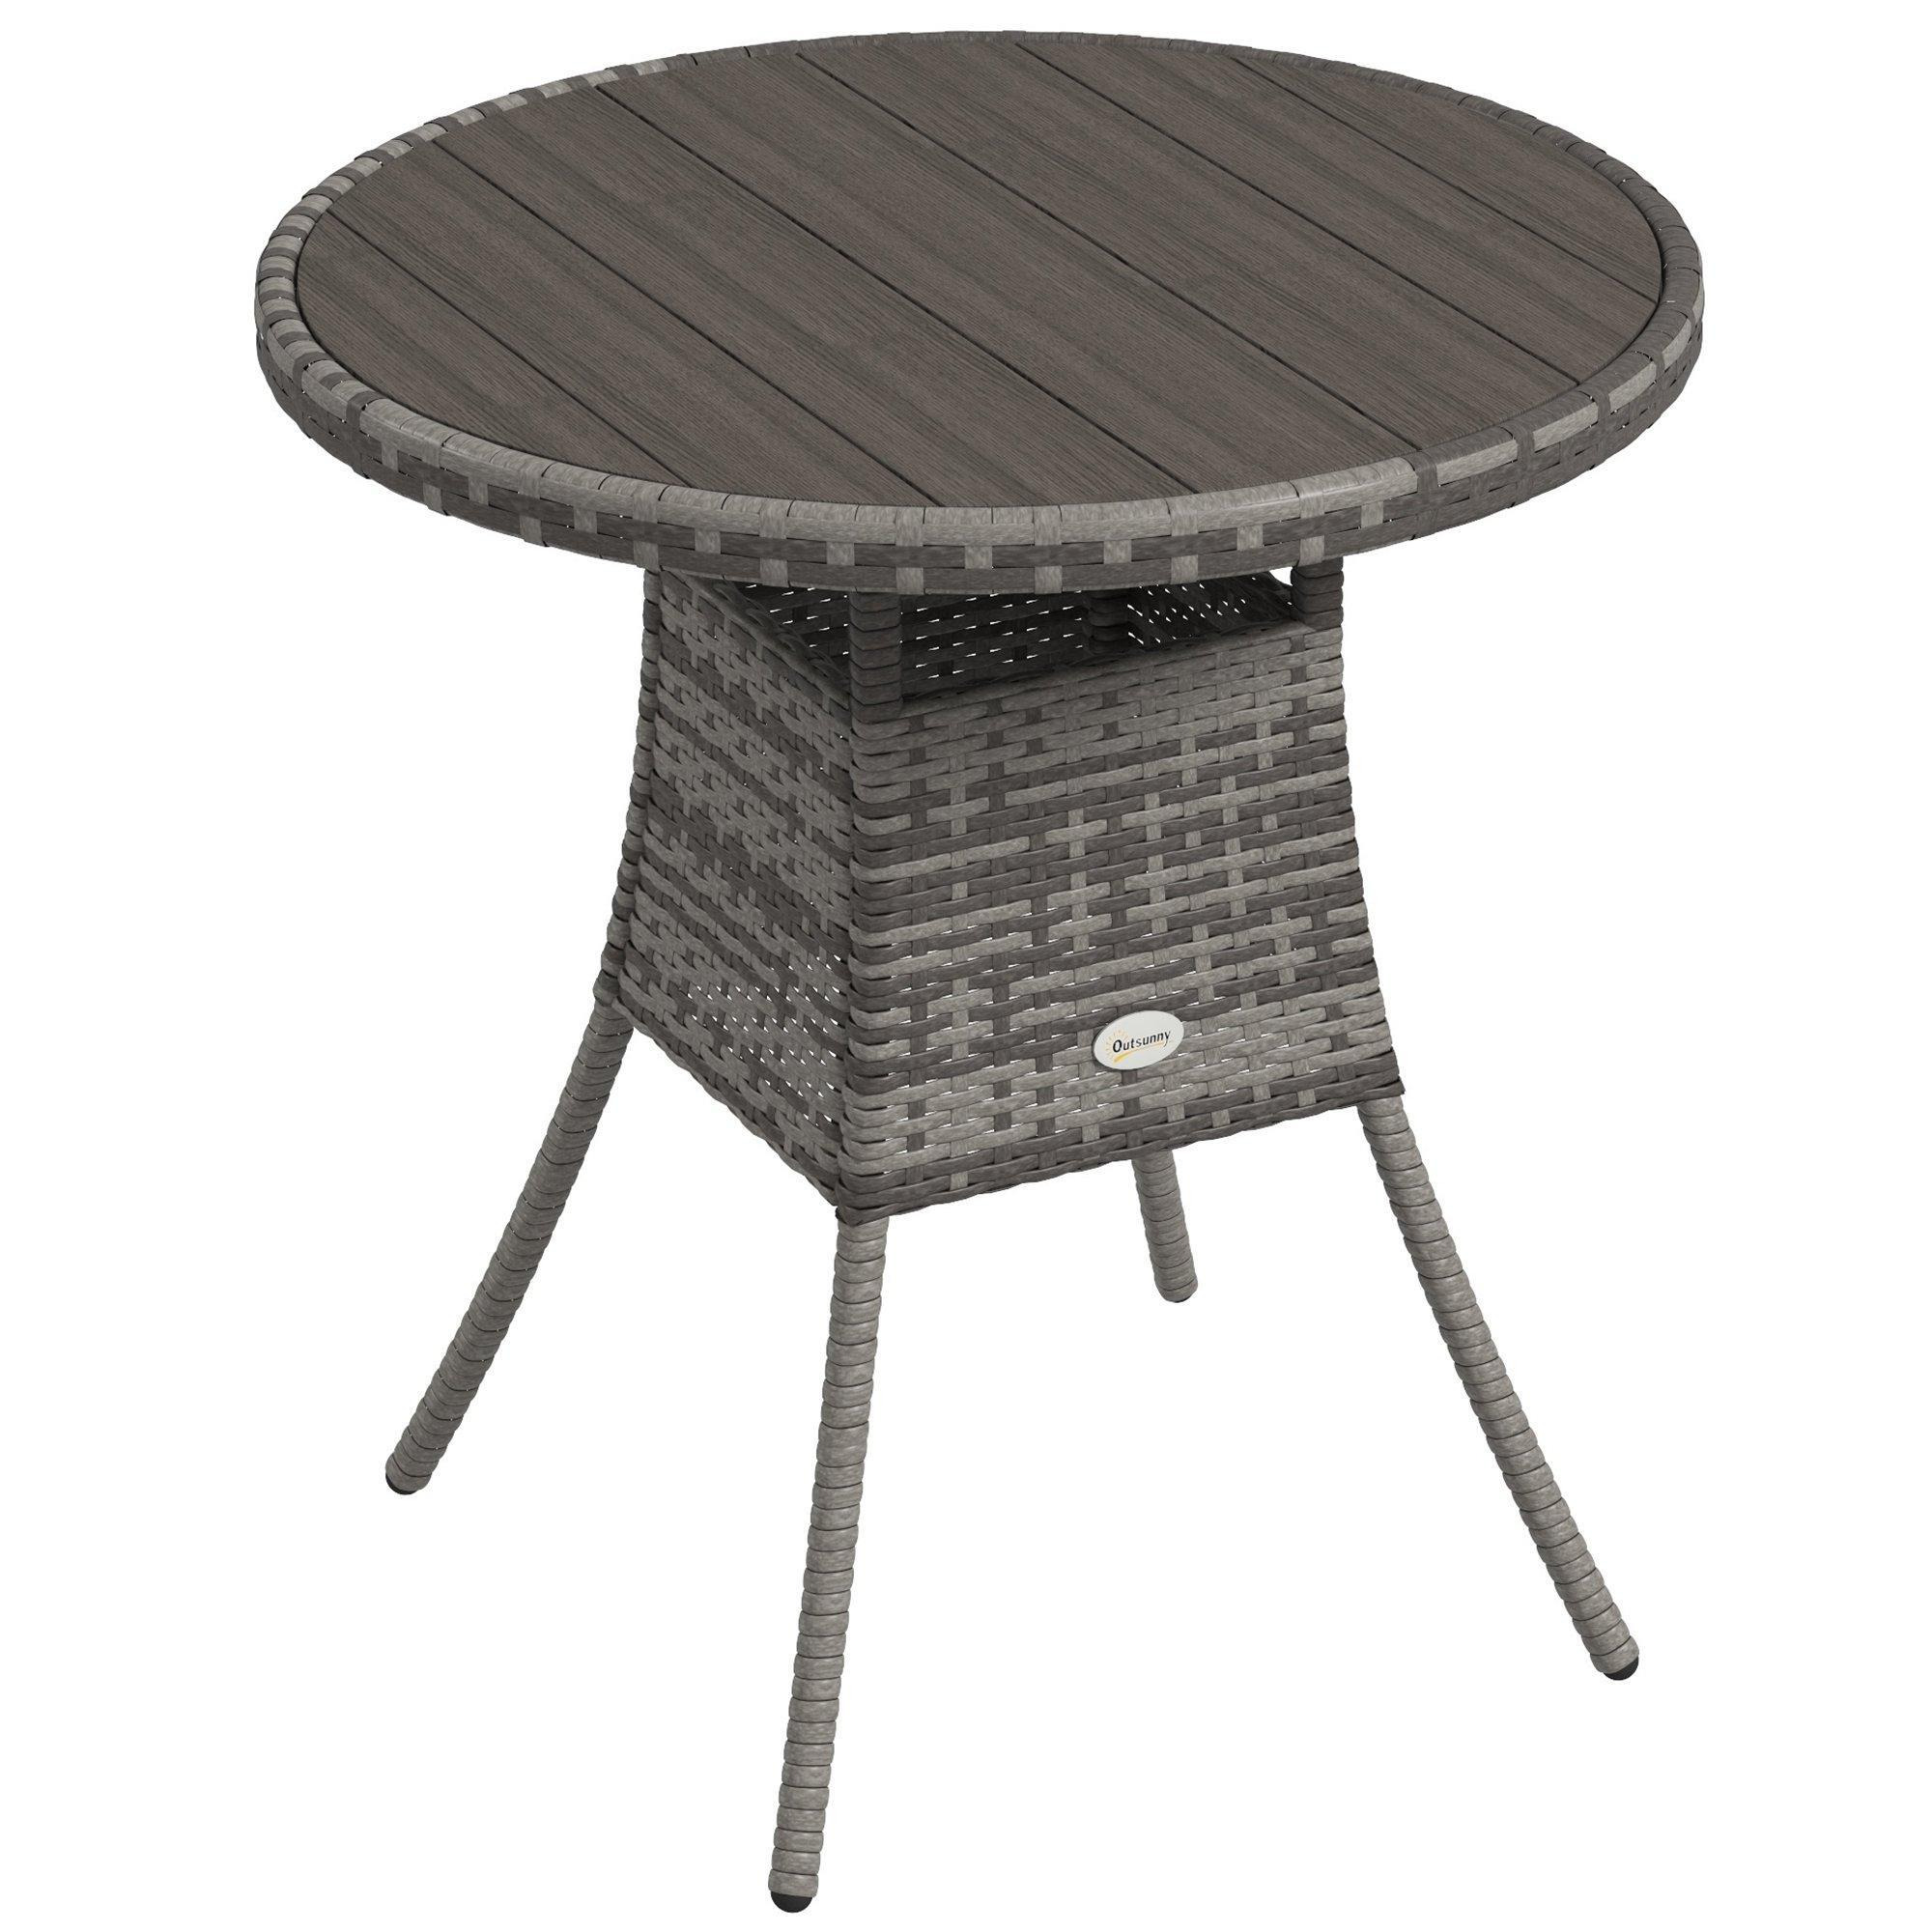 70cm Outdoor PE Rattan Dining Table with Wood-plastic Composite Top, Grey - image 1